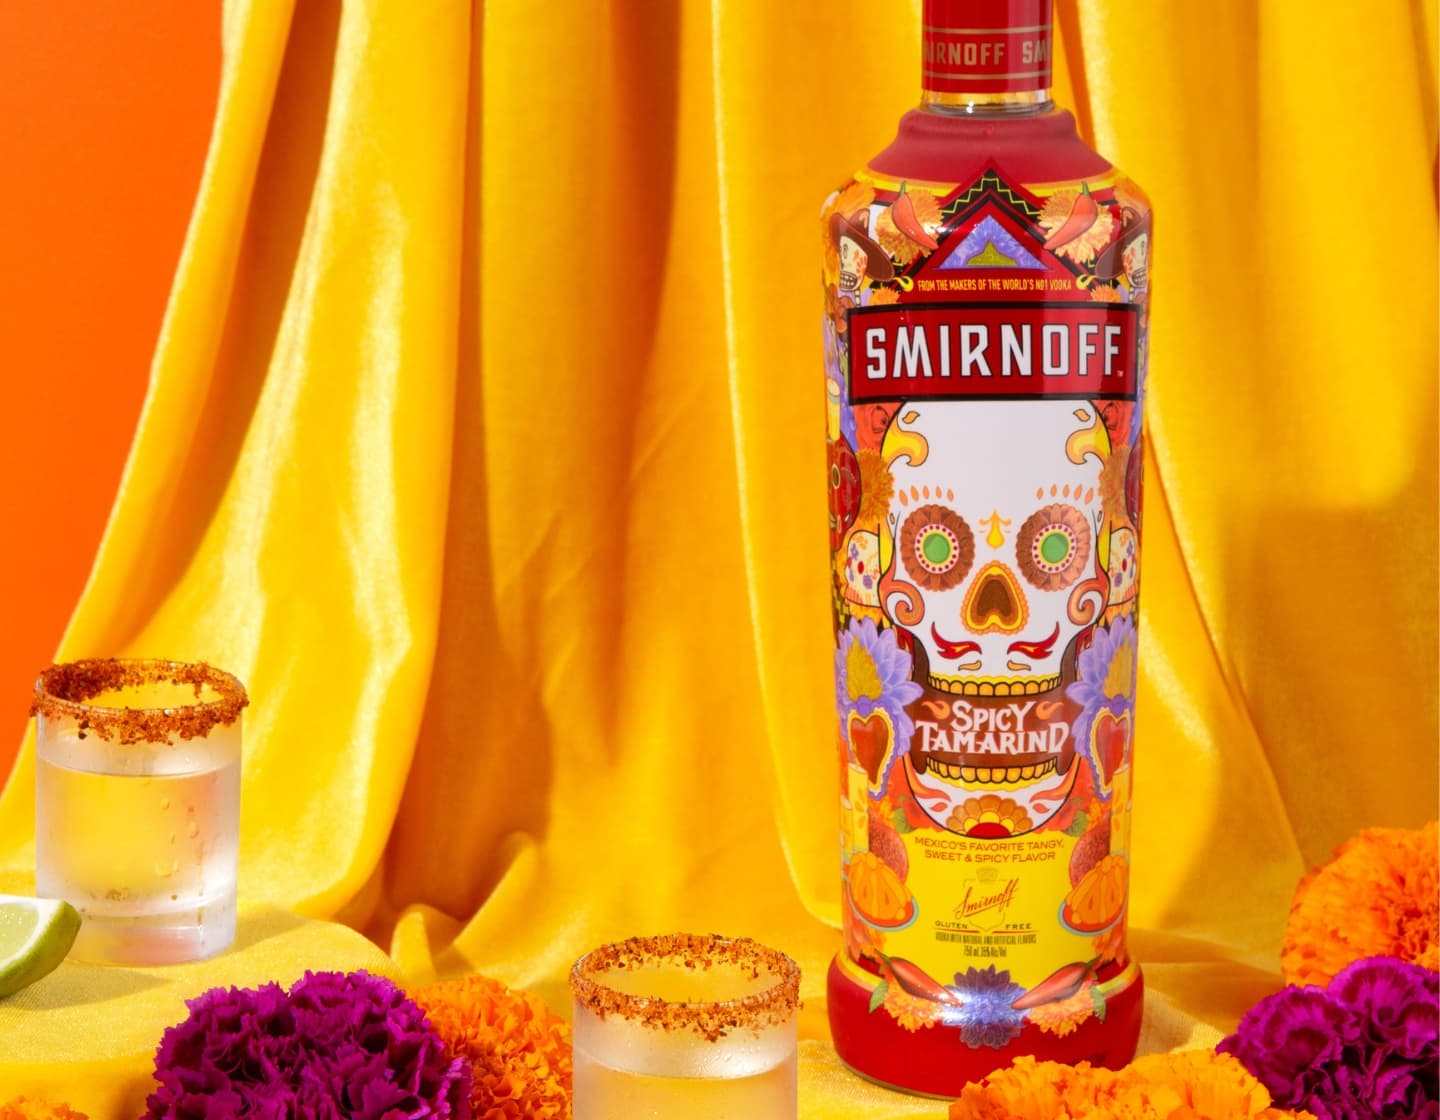 Bottle of Smirnoff Spicy Tamarind with two cocktails against yellow draped fabric